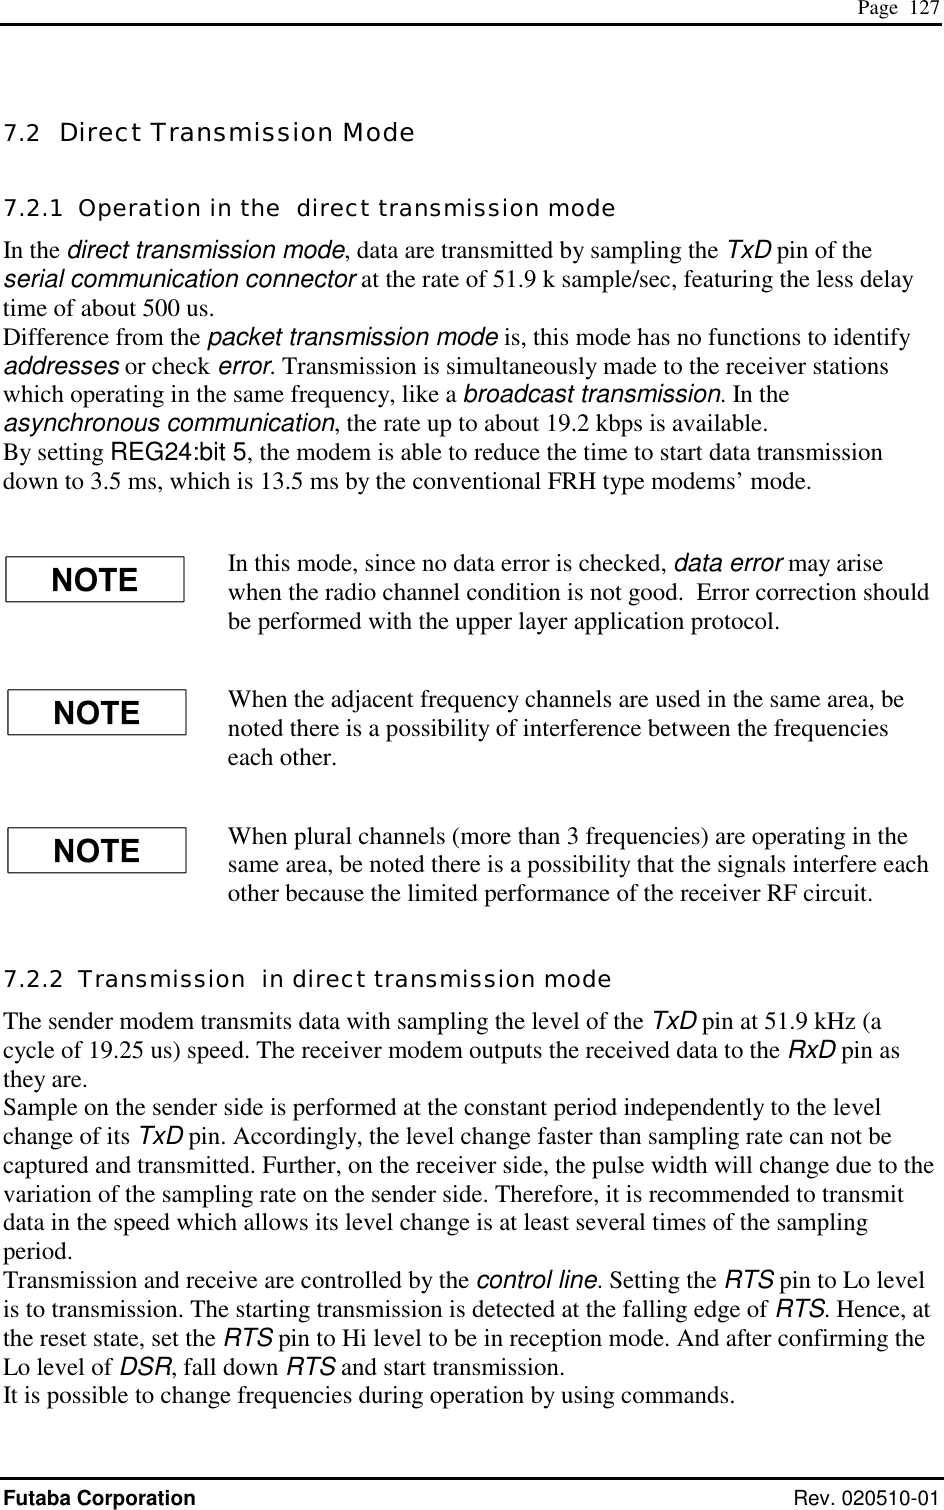  Page  127 Futaba Corporation Rev. 020510-01 7.2  Direct Transmission Mode 7.2.1  Operation in the  direct transmission mode In the direct transmission mode, data are transmitted by sampling the TxD pin of the serial communication connector at the rate of 51.9 k sample/sec, featuring the less delay time of about 500 us. Difference from the packet transmission mode is, this mode has no functions to identify addresses or check error. Transmission is simultaneously made to the receiver stations which operating in the same frequency, like a broadcast transmission. In the asynchronous communication, the rate up to about 19.2 kbps is available. By setting REG24:bit 5, the modem is able to reduce the time to start data transmission down to 3.5 ms, which is 13.5 ms by the conventional FRH type modems’ mode.  In this mode, since no data error is checked, data error may arise when the radio channel condition is not good.  Error correction should be performed with the upper layer application protocol. When the adjacent frequency channels are used in the same area, be noted there is a possibility of interference between the frequencies each other.   When plural channels (more than 3 frequencies) are operating in the same area, be noted there is a possibility that the signals interfere each other because the limited performance of the receiver RF circuit. 7.2.2  Transmission  in direct transmission mode The sender modem transmits data with sampling the level of the TxD pin at 51.9 kHz (a cycle of 19.25 us) speed. The receiver modem outputs the received data to the RxD pin as they are. Sample on the sender side is performed at the constant period independently to the level change of its TxD pin. Accordingly, the level change faster than sampling rate can not be captured and transmitted. Further, on the receiver side, the pulse width will change due to the variation of the sampling rate on the sender side. Therefore, it is recommended to transmit data in the speed which allows its level change is at least several times of the sampling period. Transmission and receive are controlled by the control line. Setting the RTS pin to Lo level is to transmission. The starting transmission is detected at the falling edge of RTS. Hence, at the reset state, set the RTS pin to Hi level to be in reception mode. And after confirming the Lo level of DSR, fall down RTS and start transmission. It is possible to change frequencies during operation by using commands. 